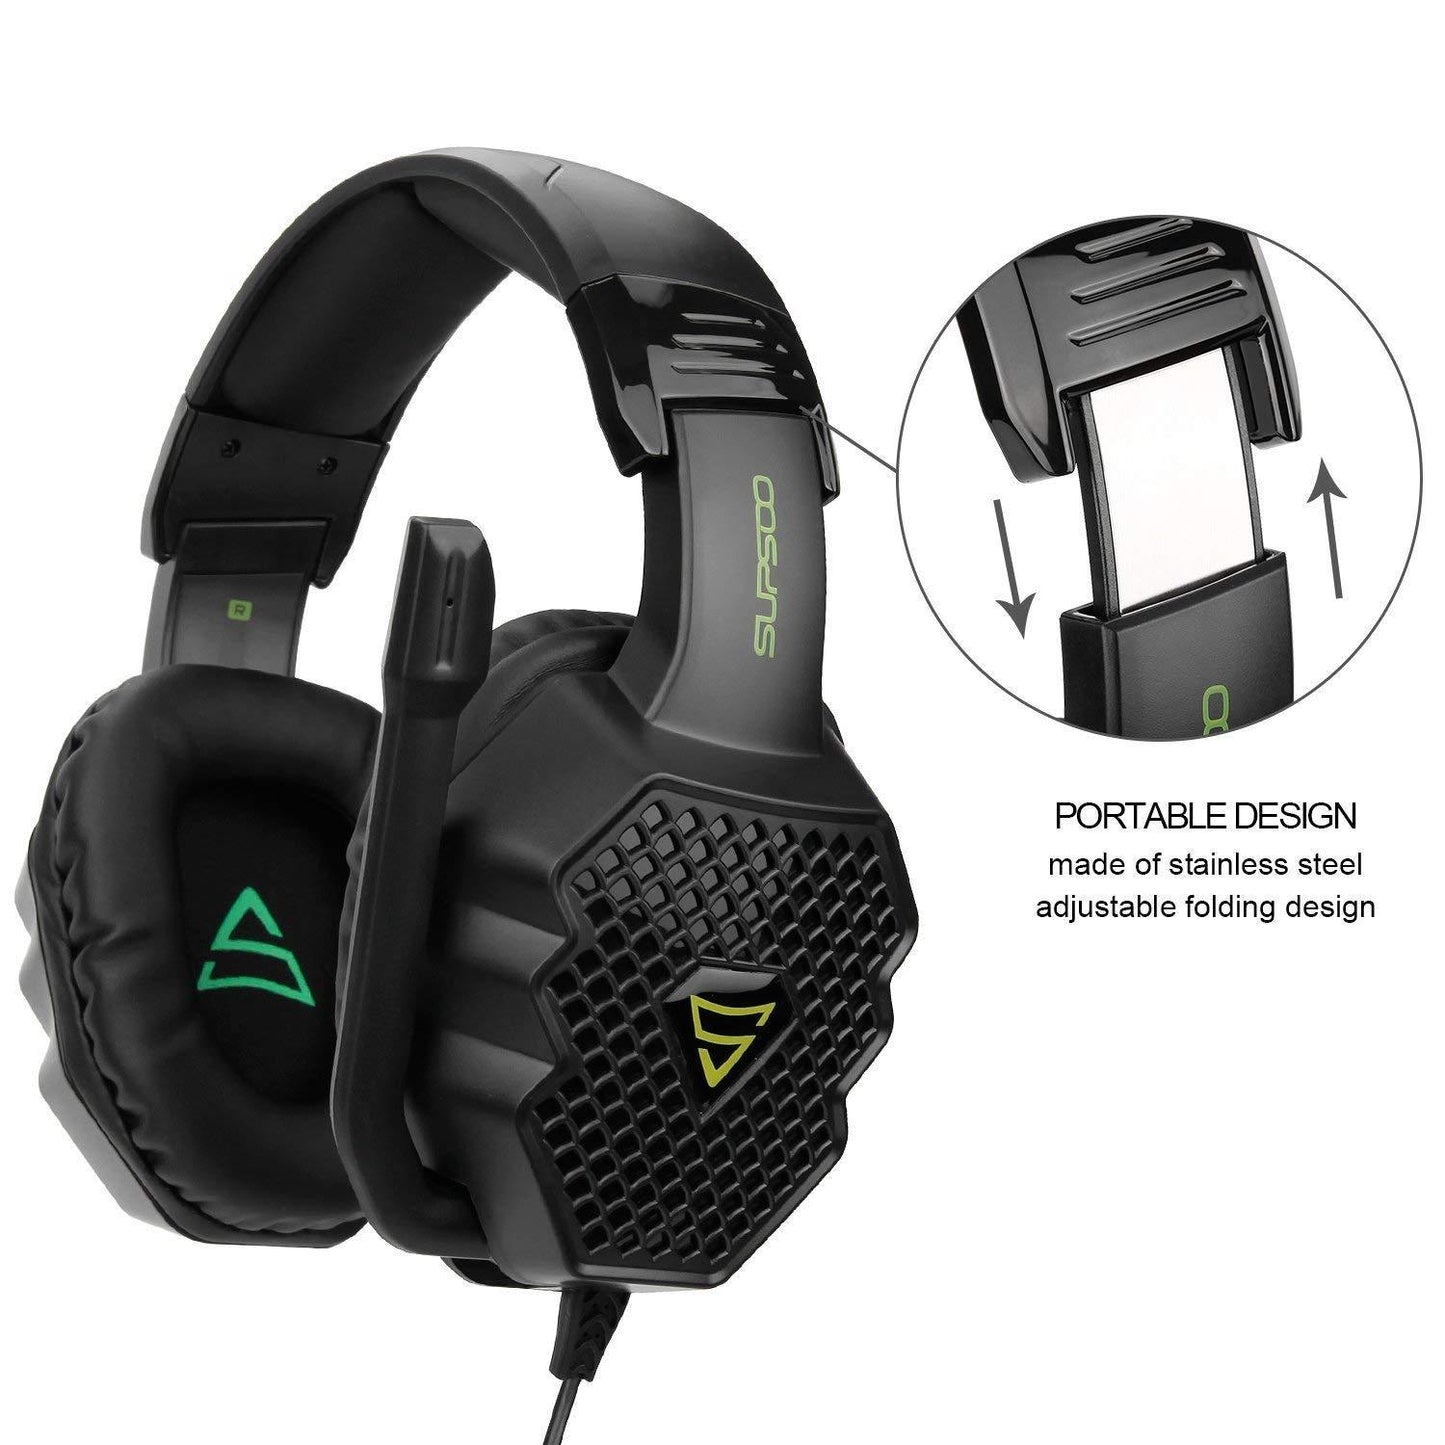 GAMING HEADSET SUPSOO G811 - PS4 - XBOXONE - PC - SWITCH - Easy Video Game